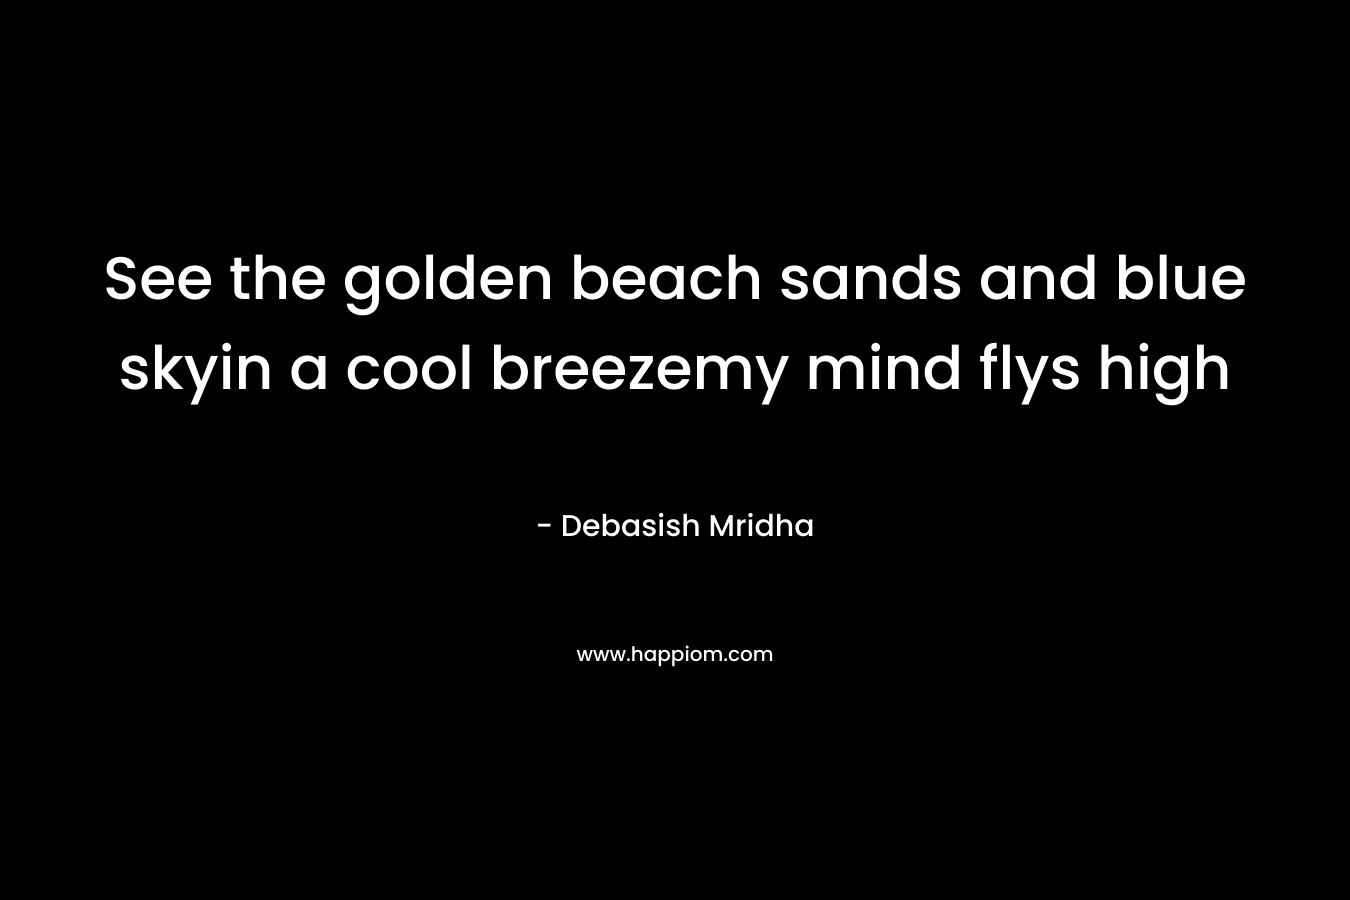 See the golden beach sands and blue skyin a cool breezemy mind flys high – Debasish Mridha